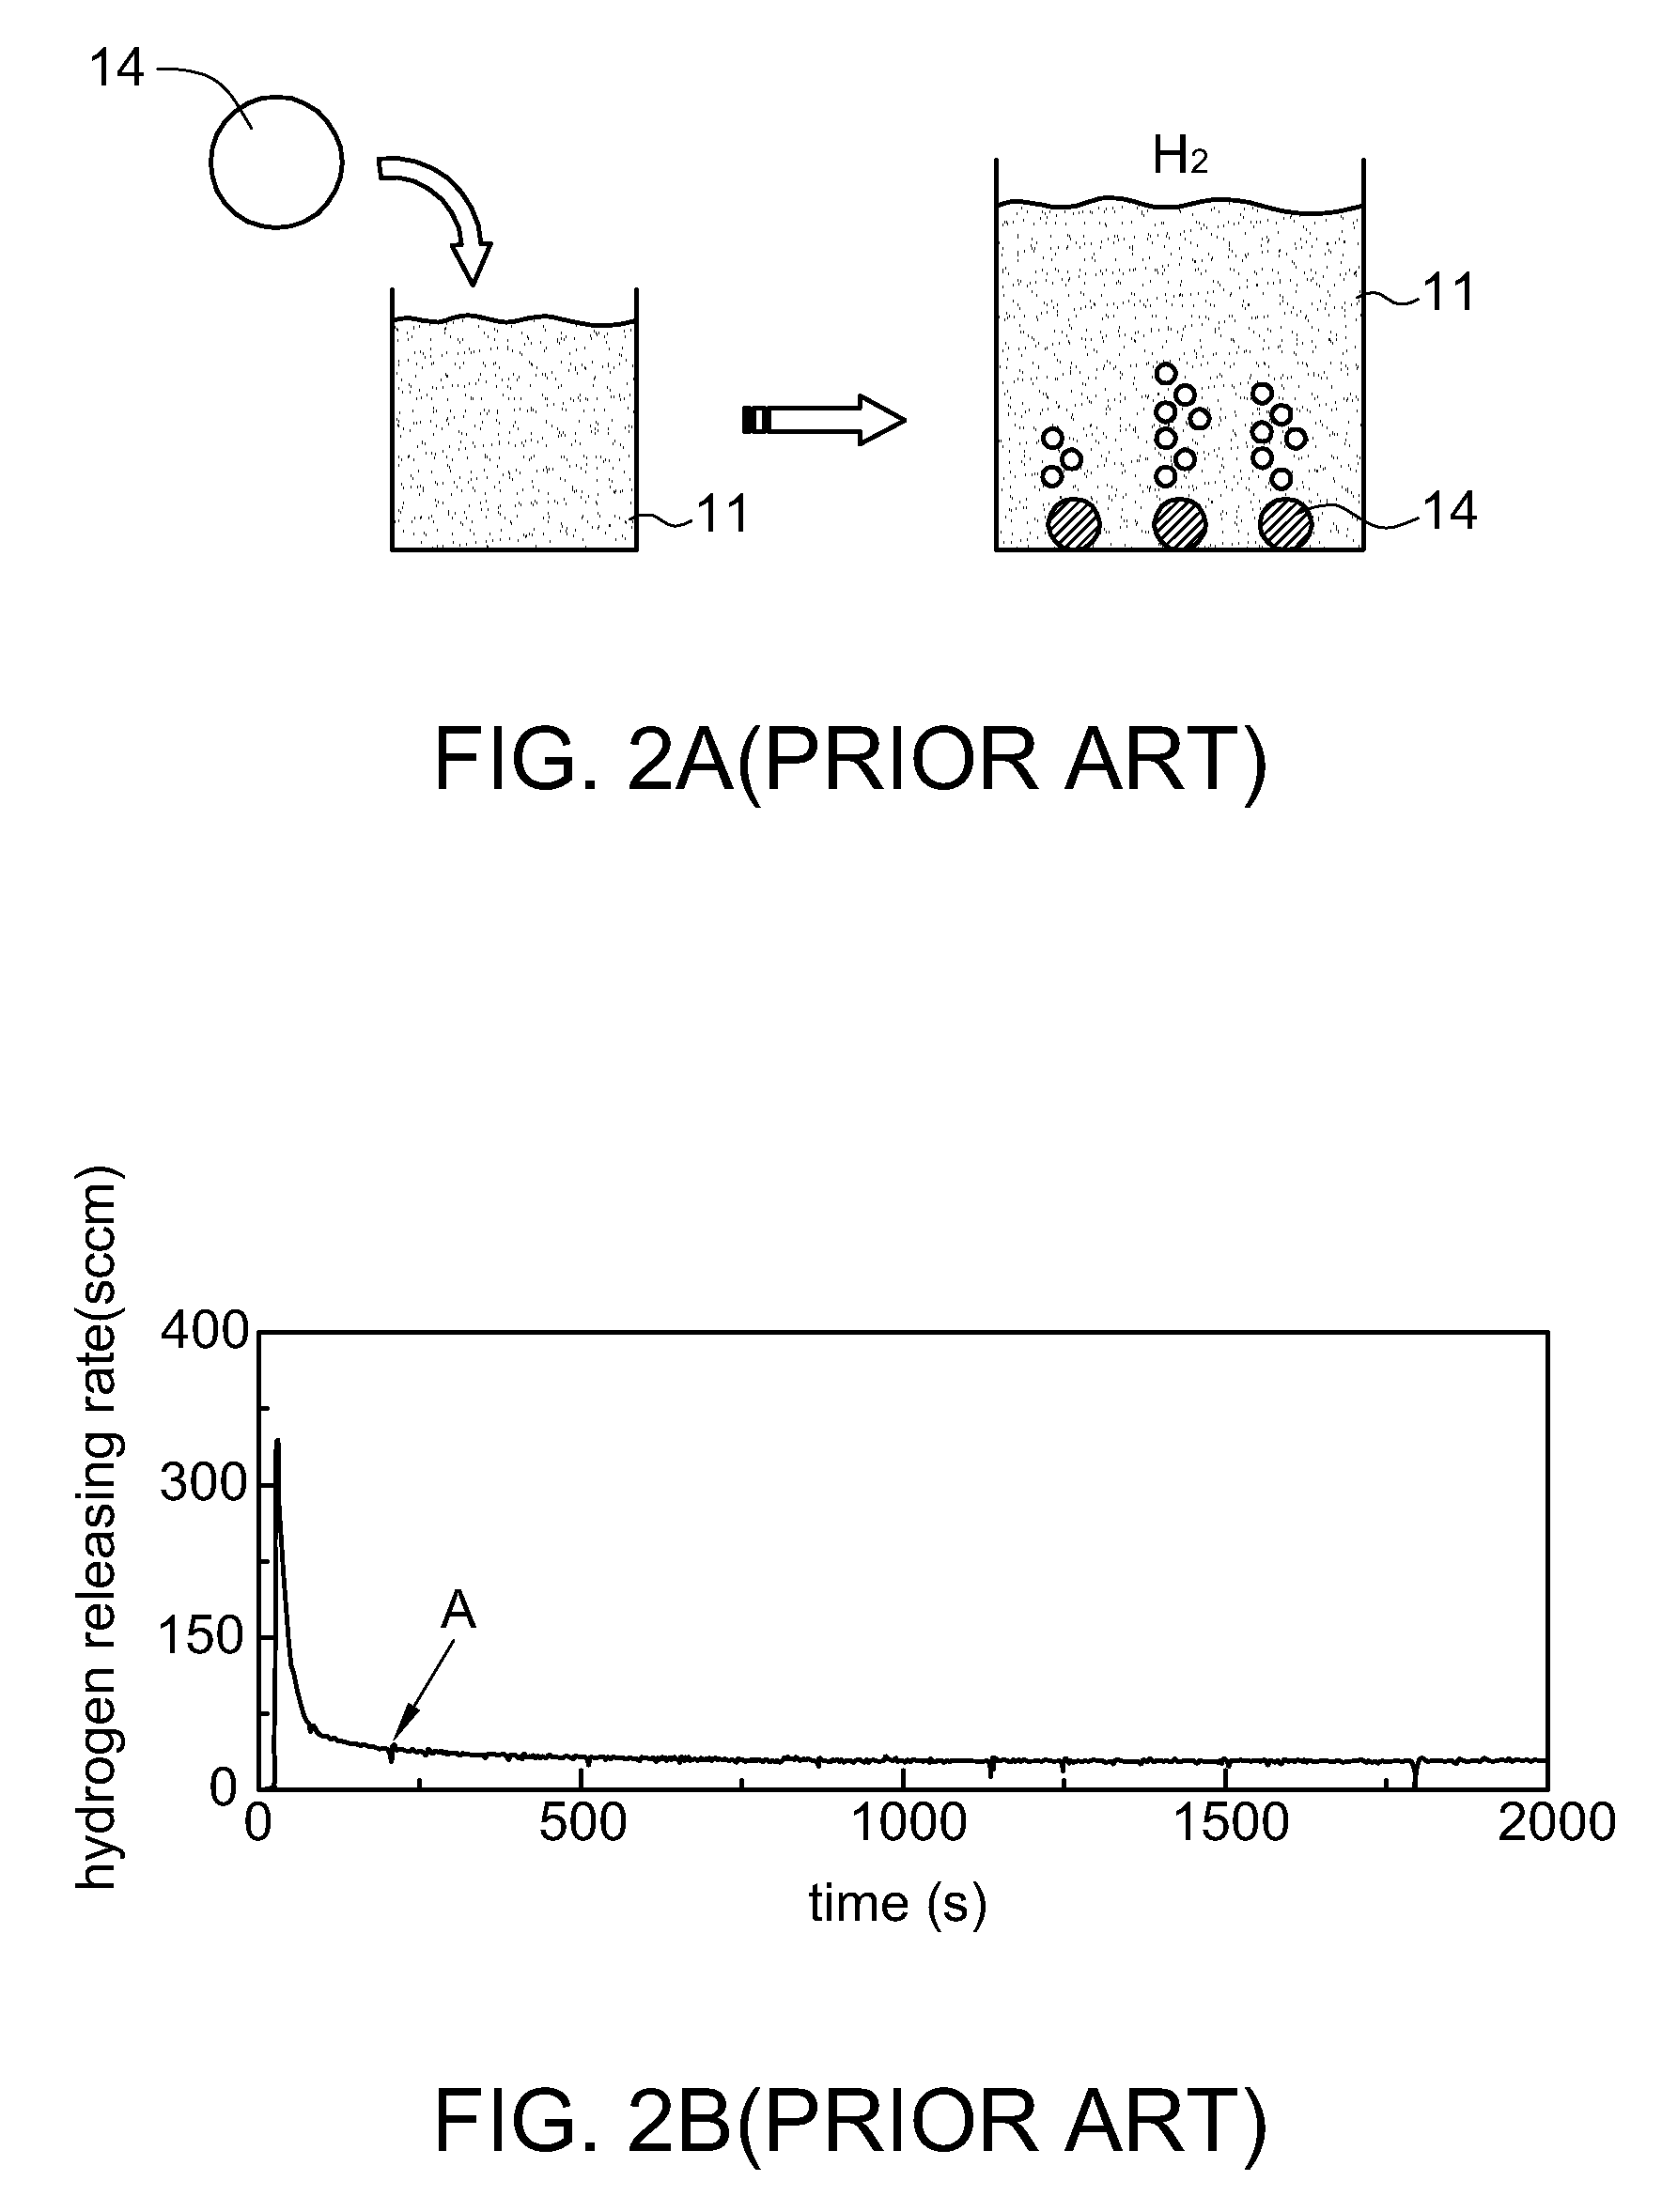 Solid Hydrogen Fuel and Method of Manufacturing and Using the Same